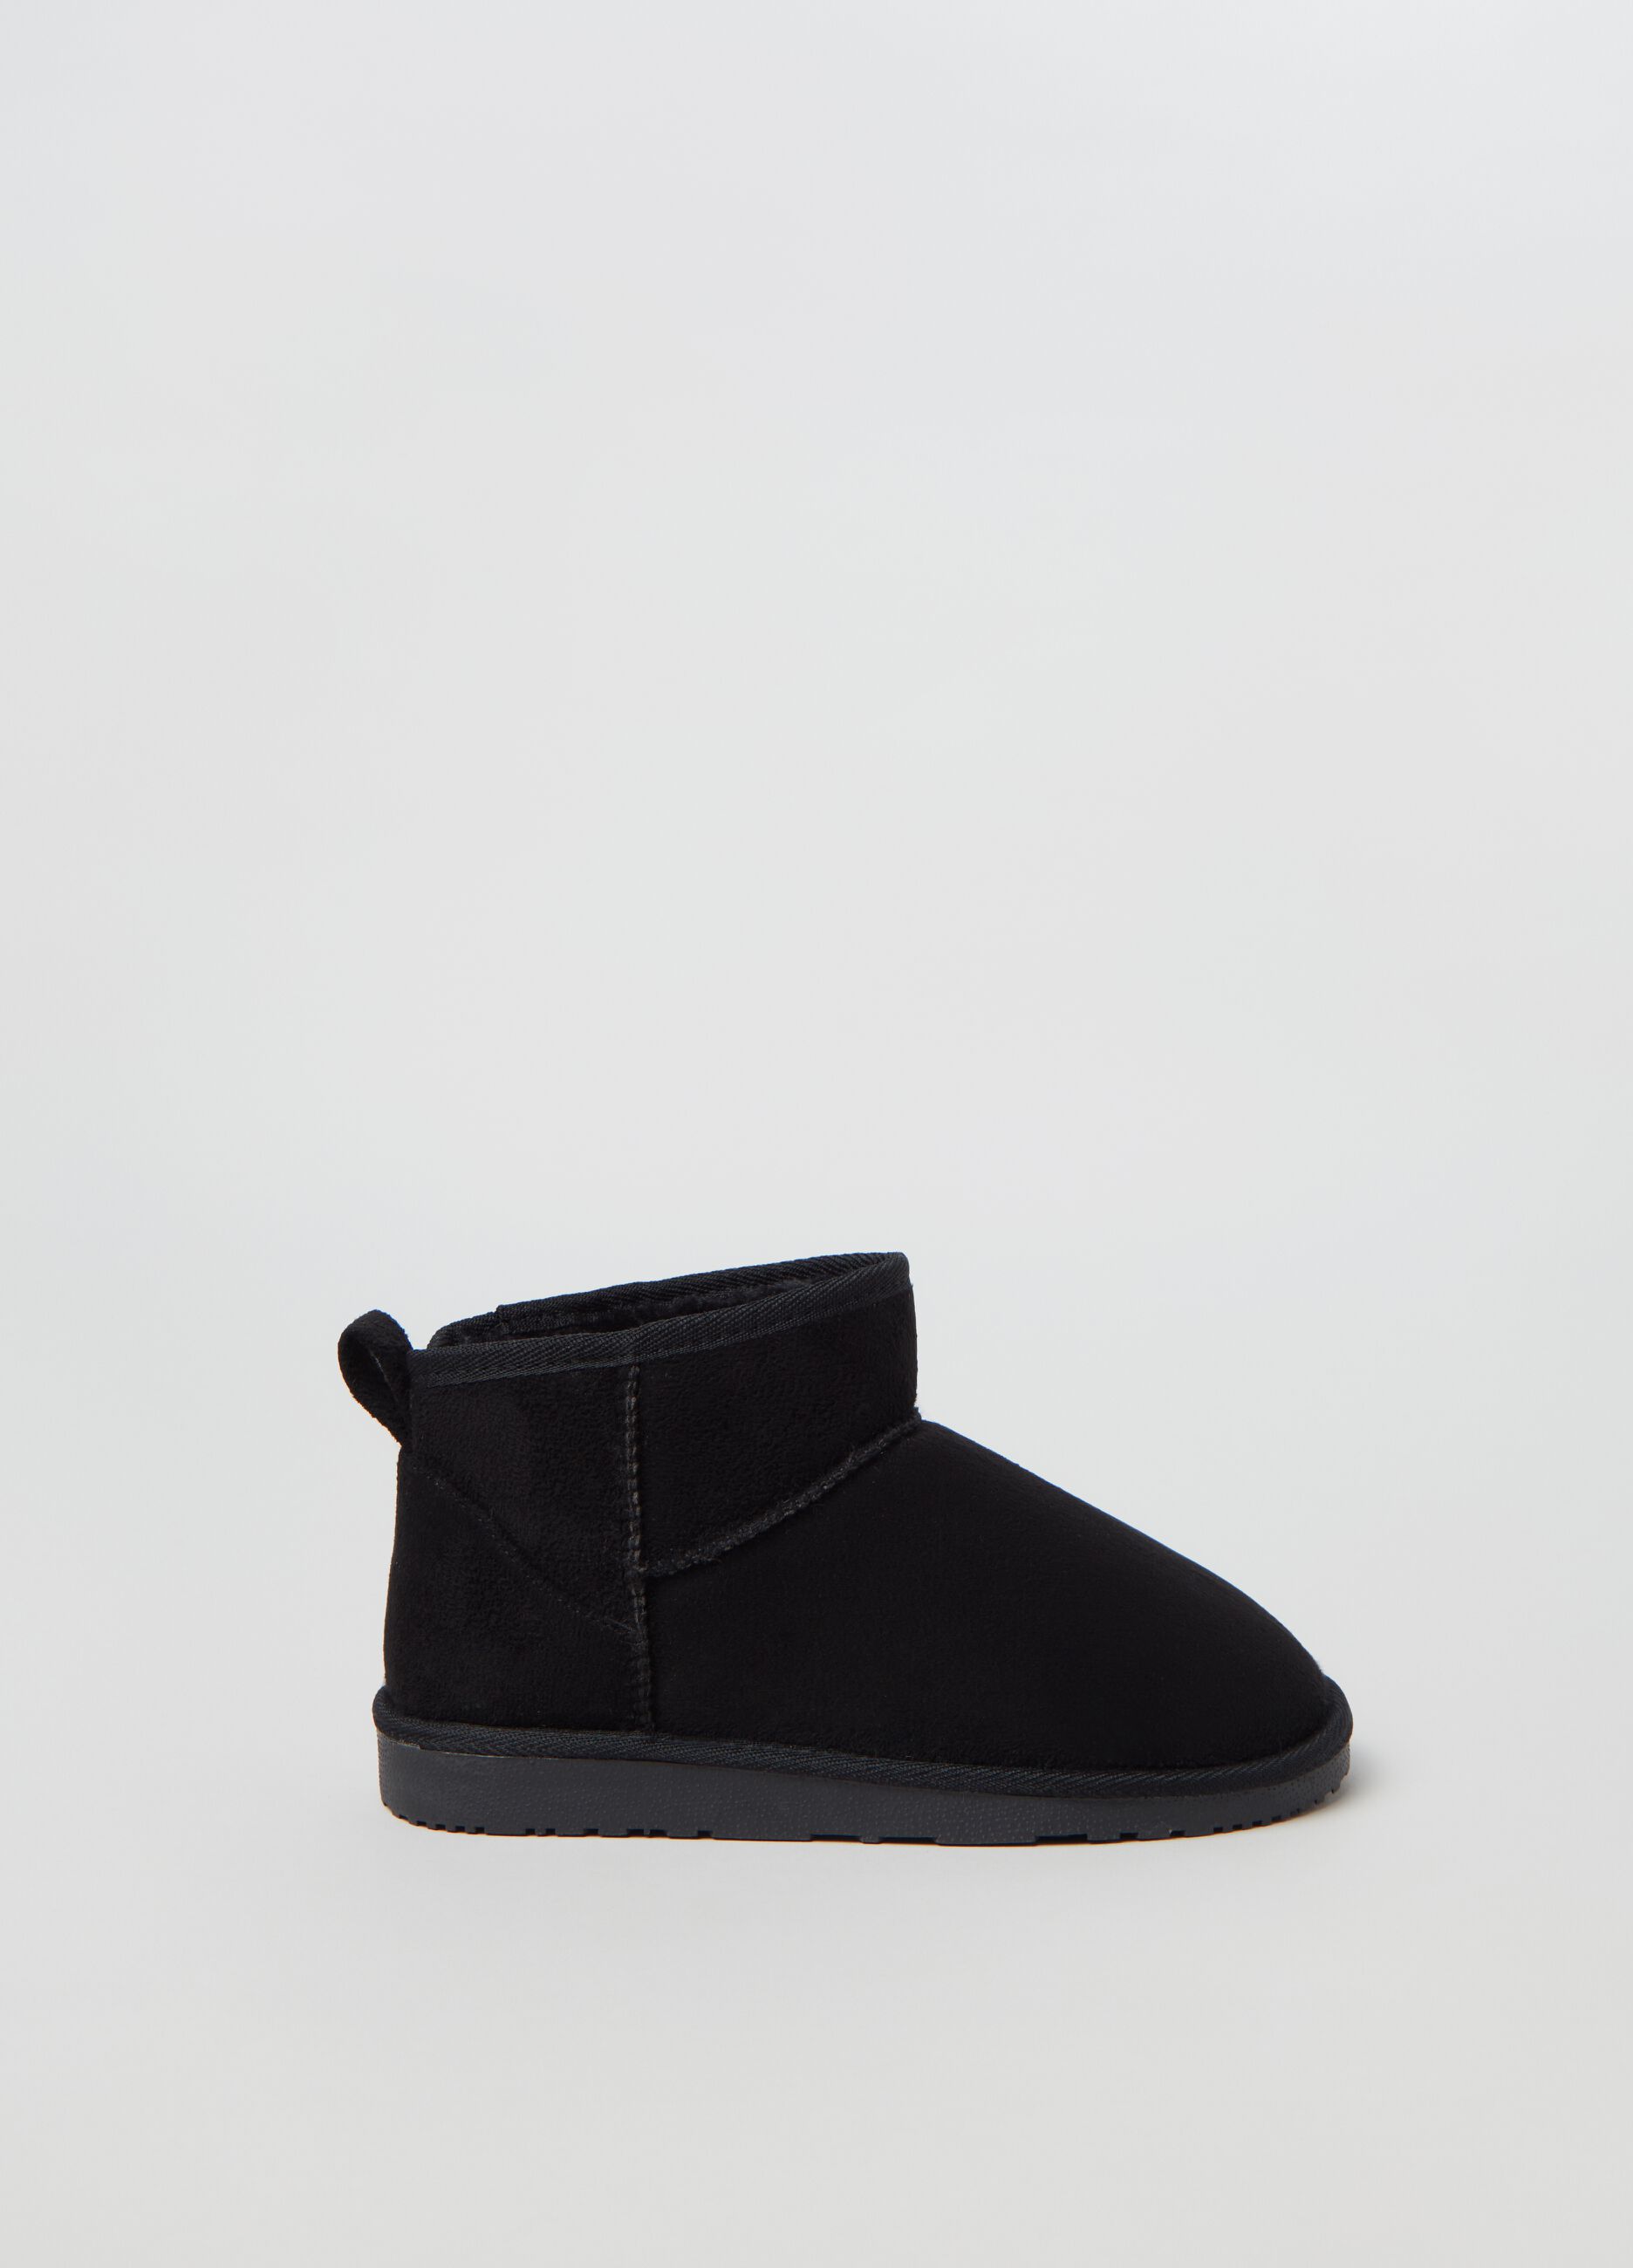 Suede-effect boots